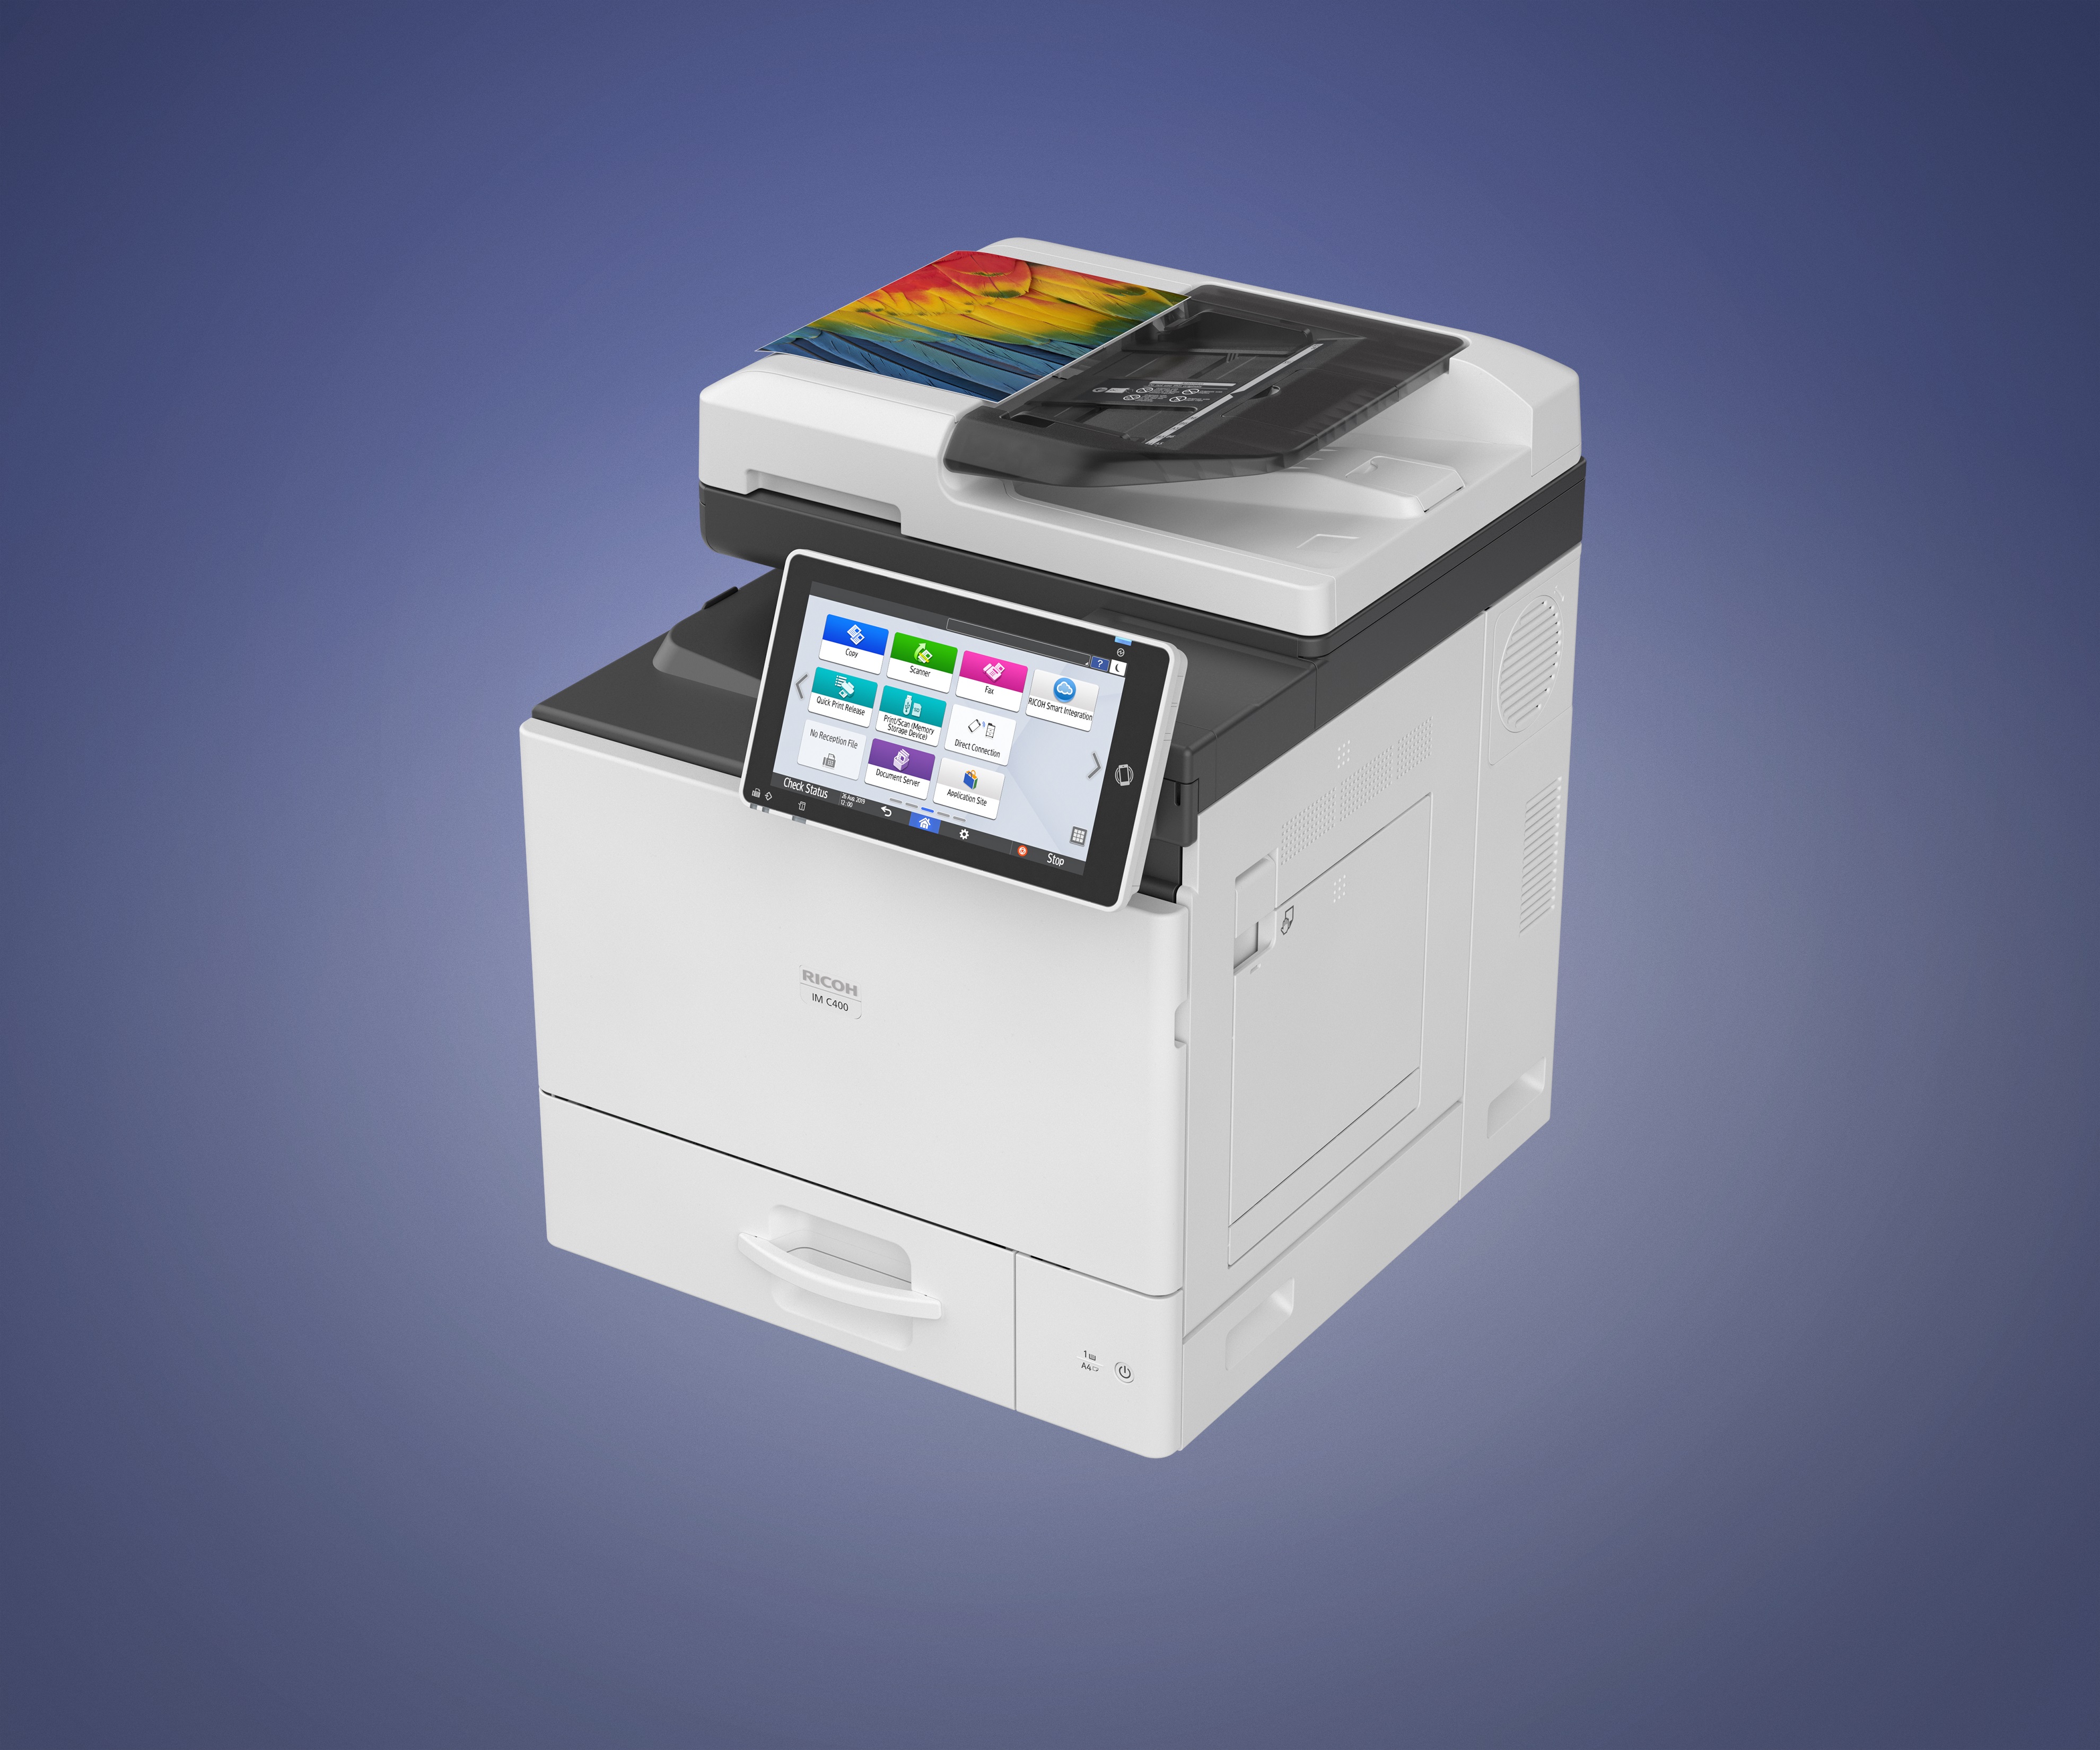 Ricoh launches A4 colour Intelligent Devices to support changing needs of the digital workplace